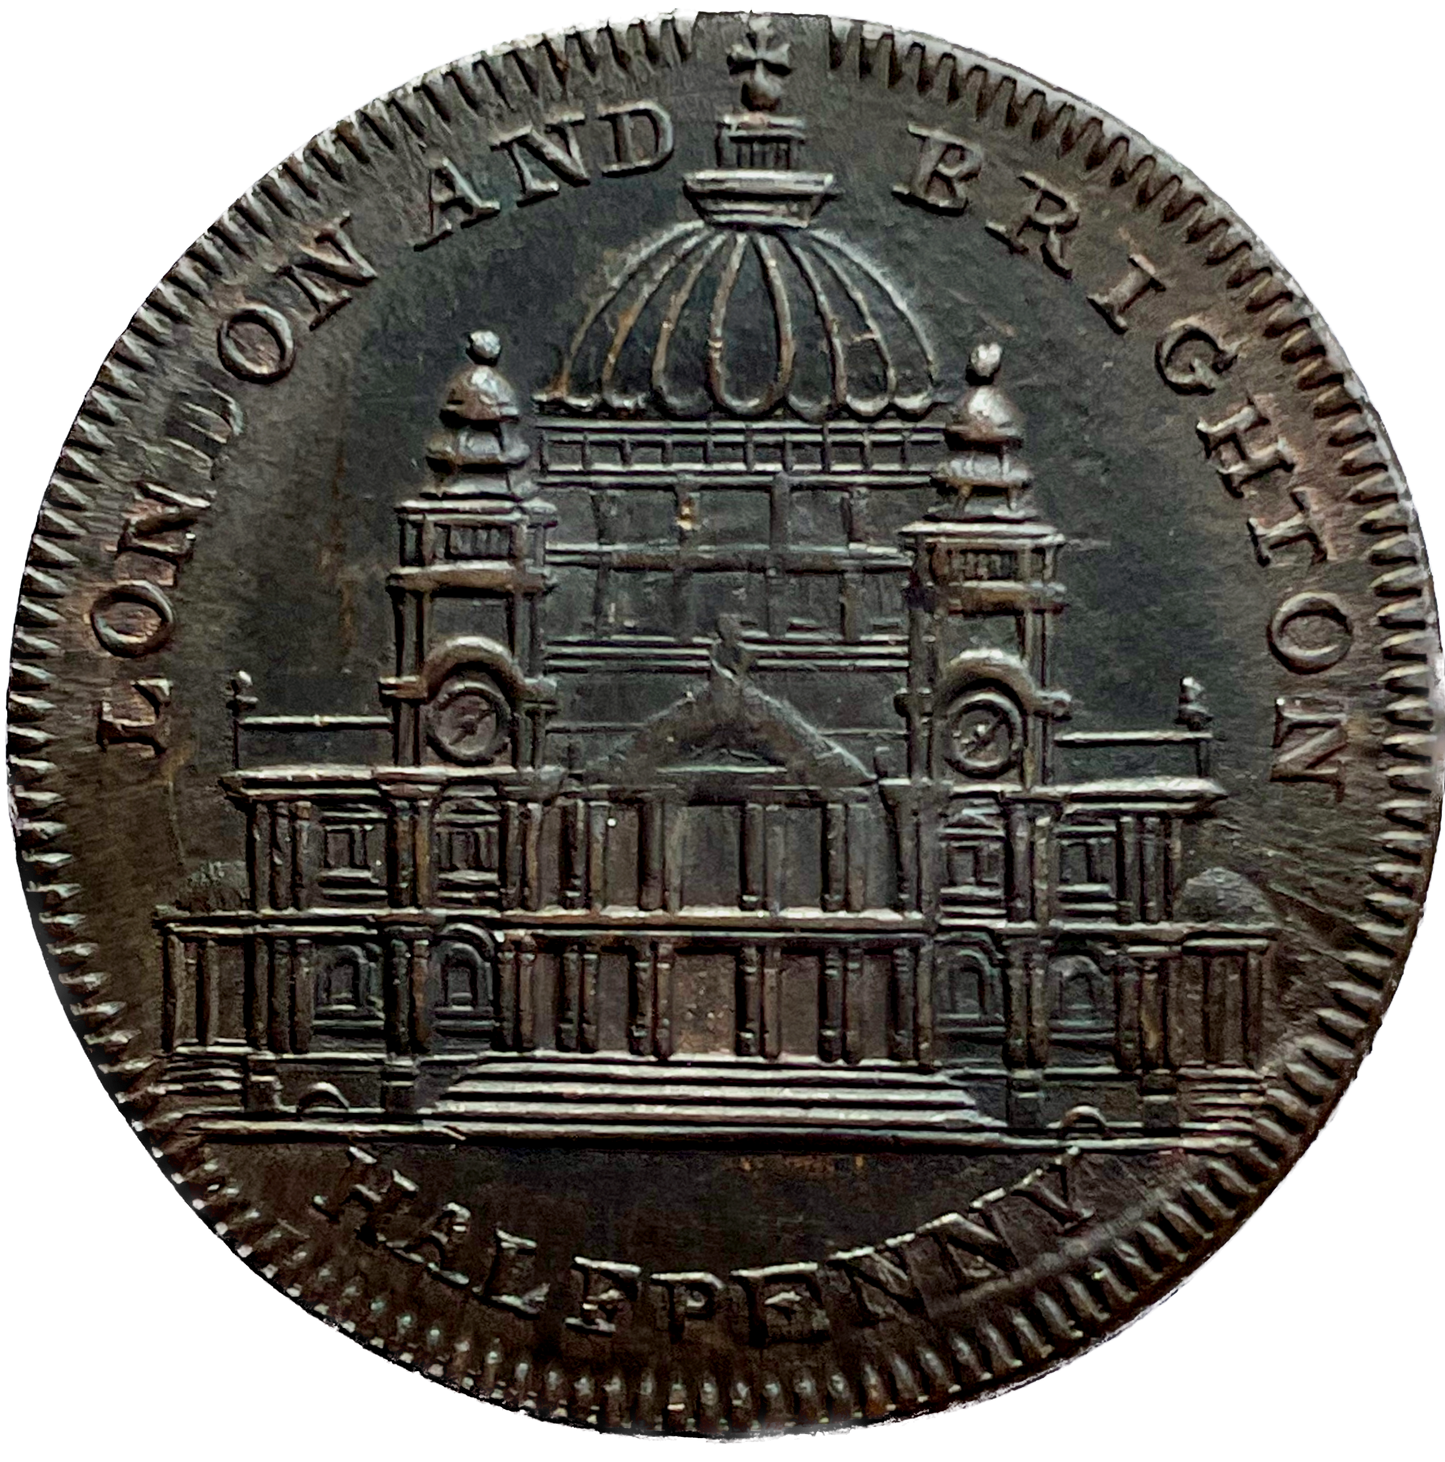 Middlesex D&H 902 Spittle's 1795 Conder Halfpenny